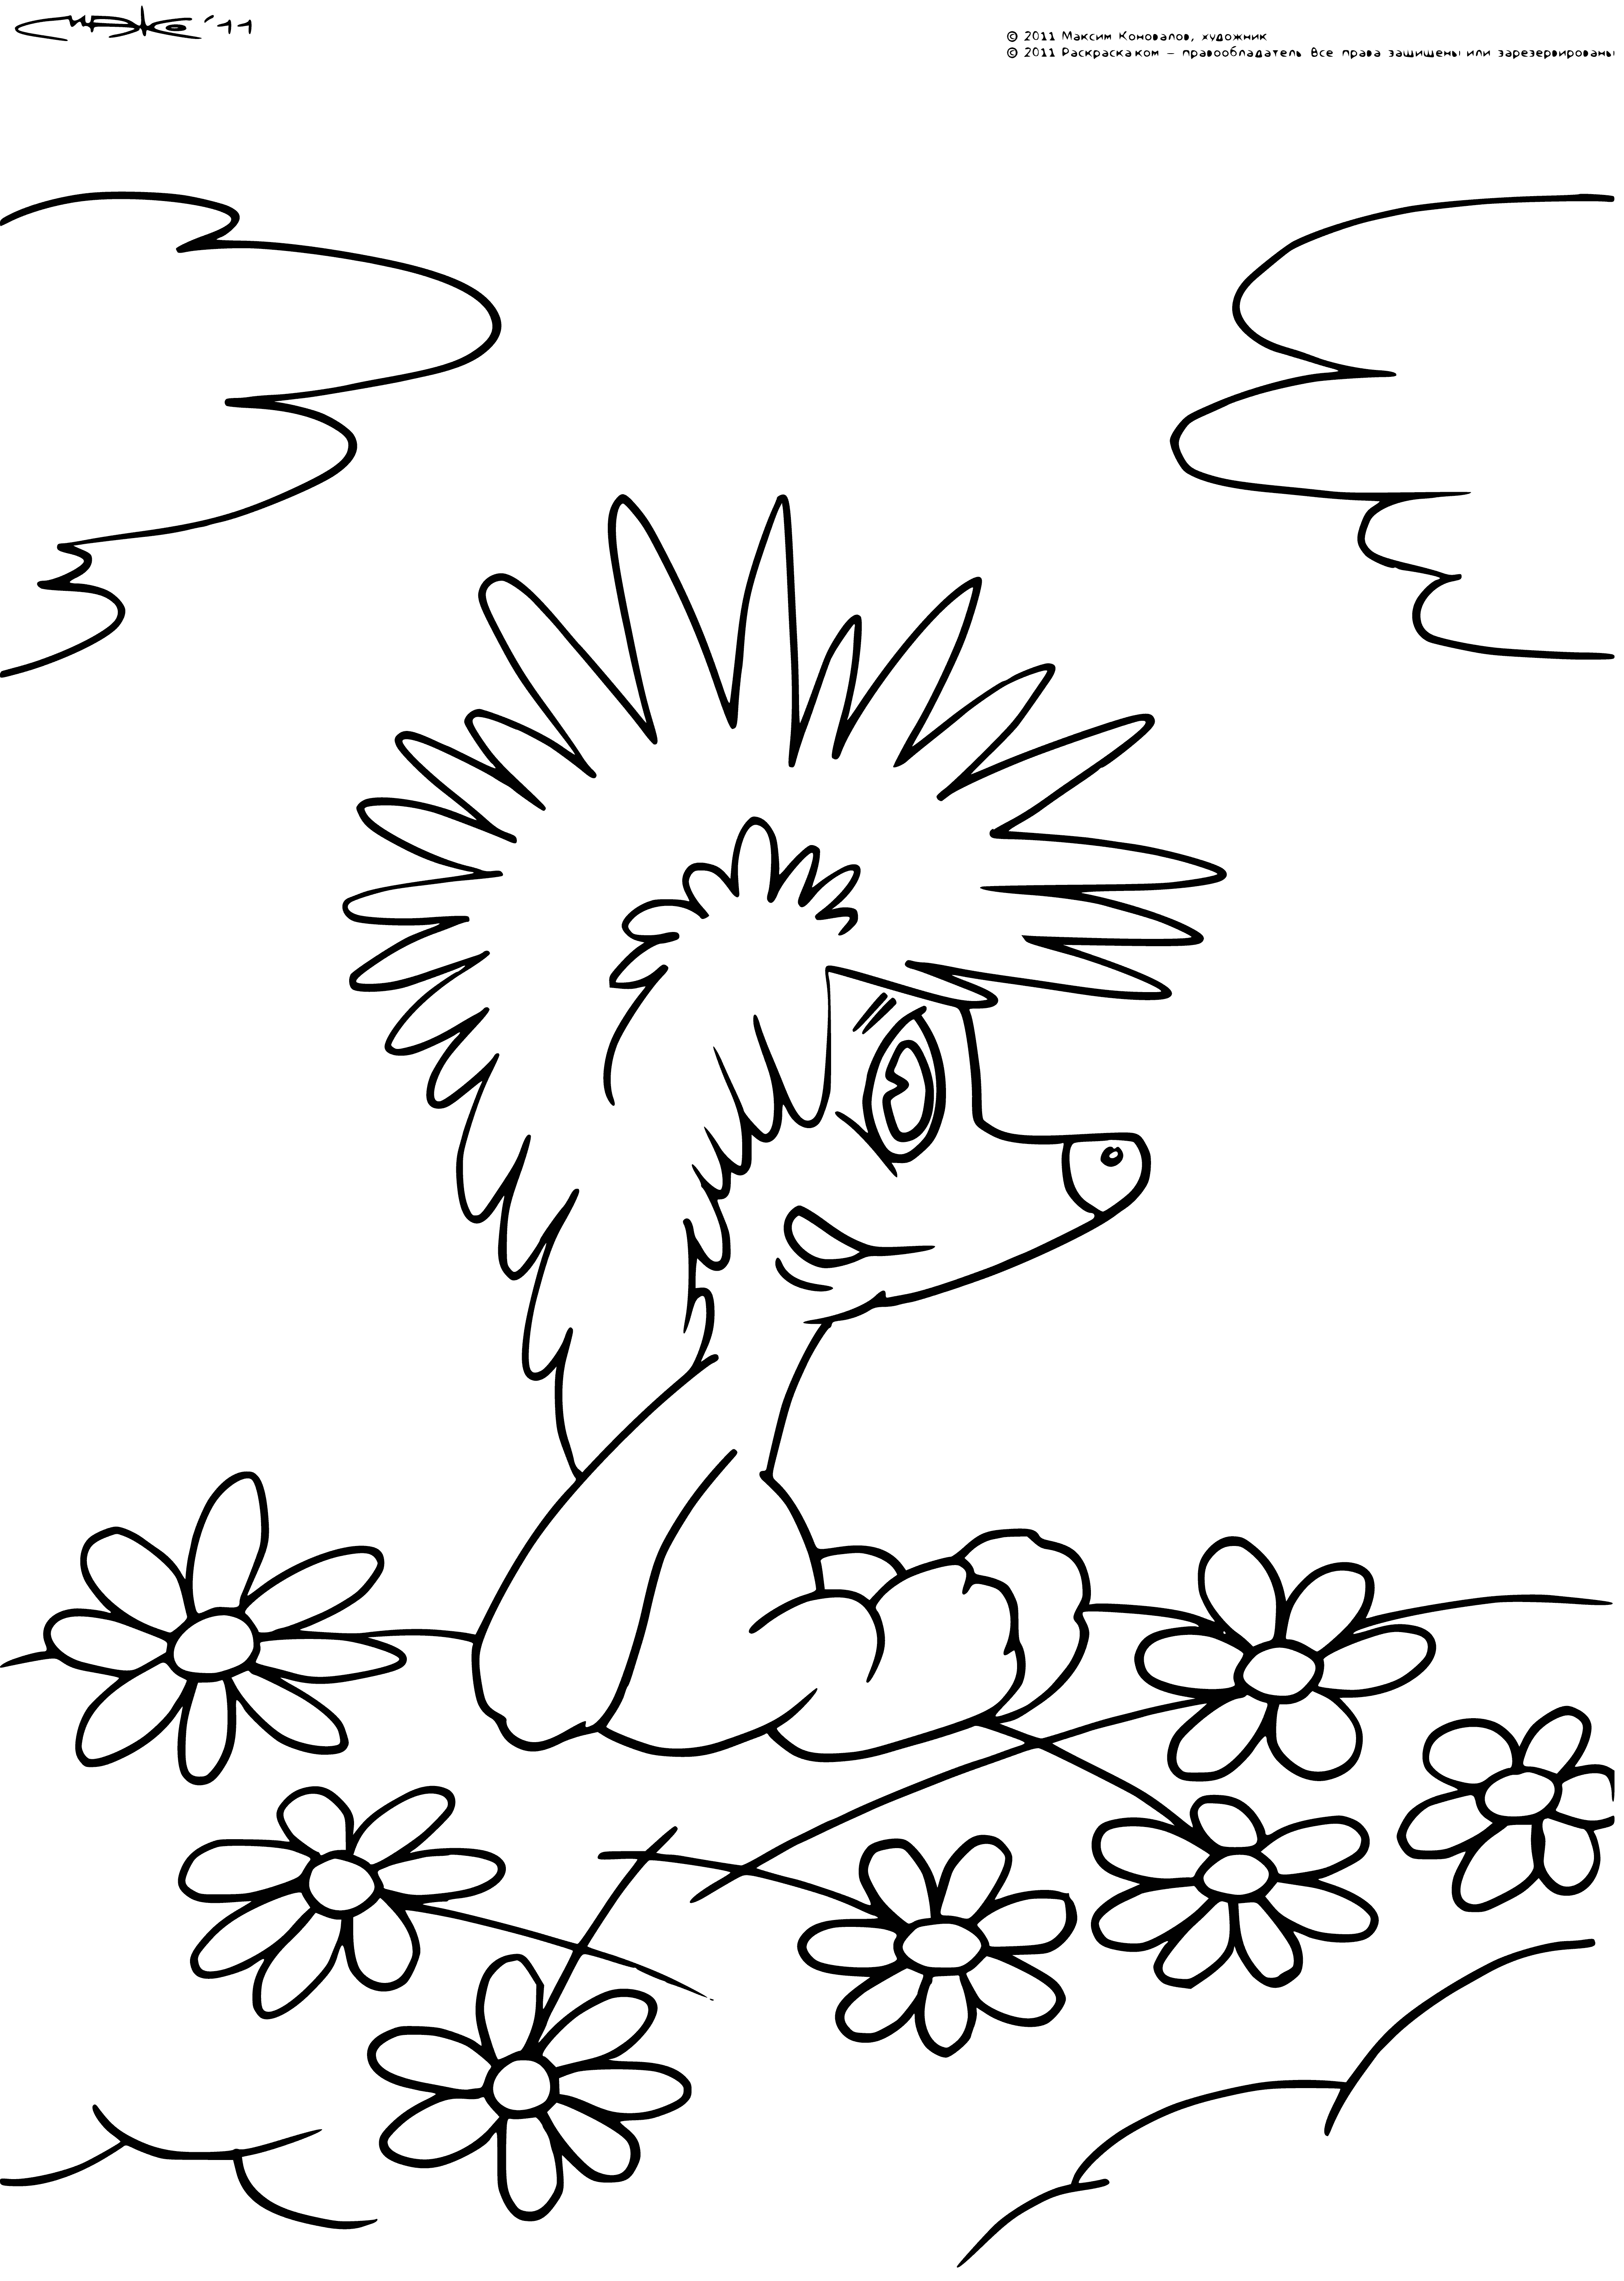 coloring page: Hedgehog on a cloud holding a balloon, with a blue and white gradient background.